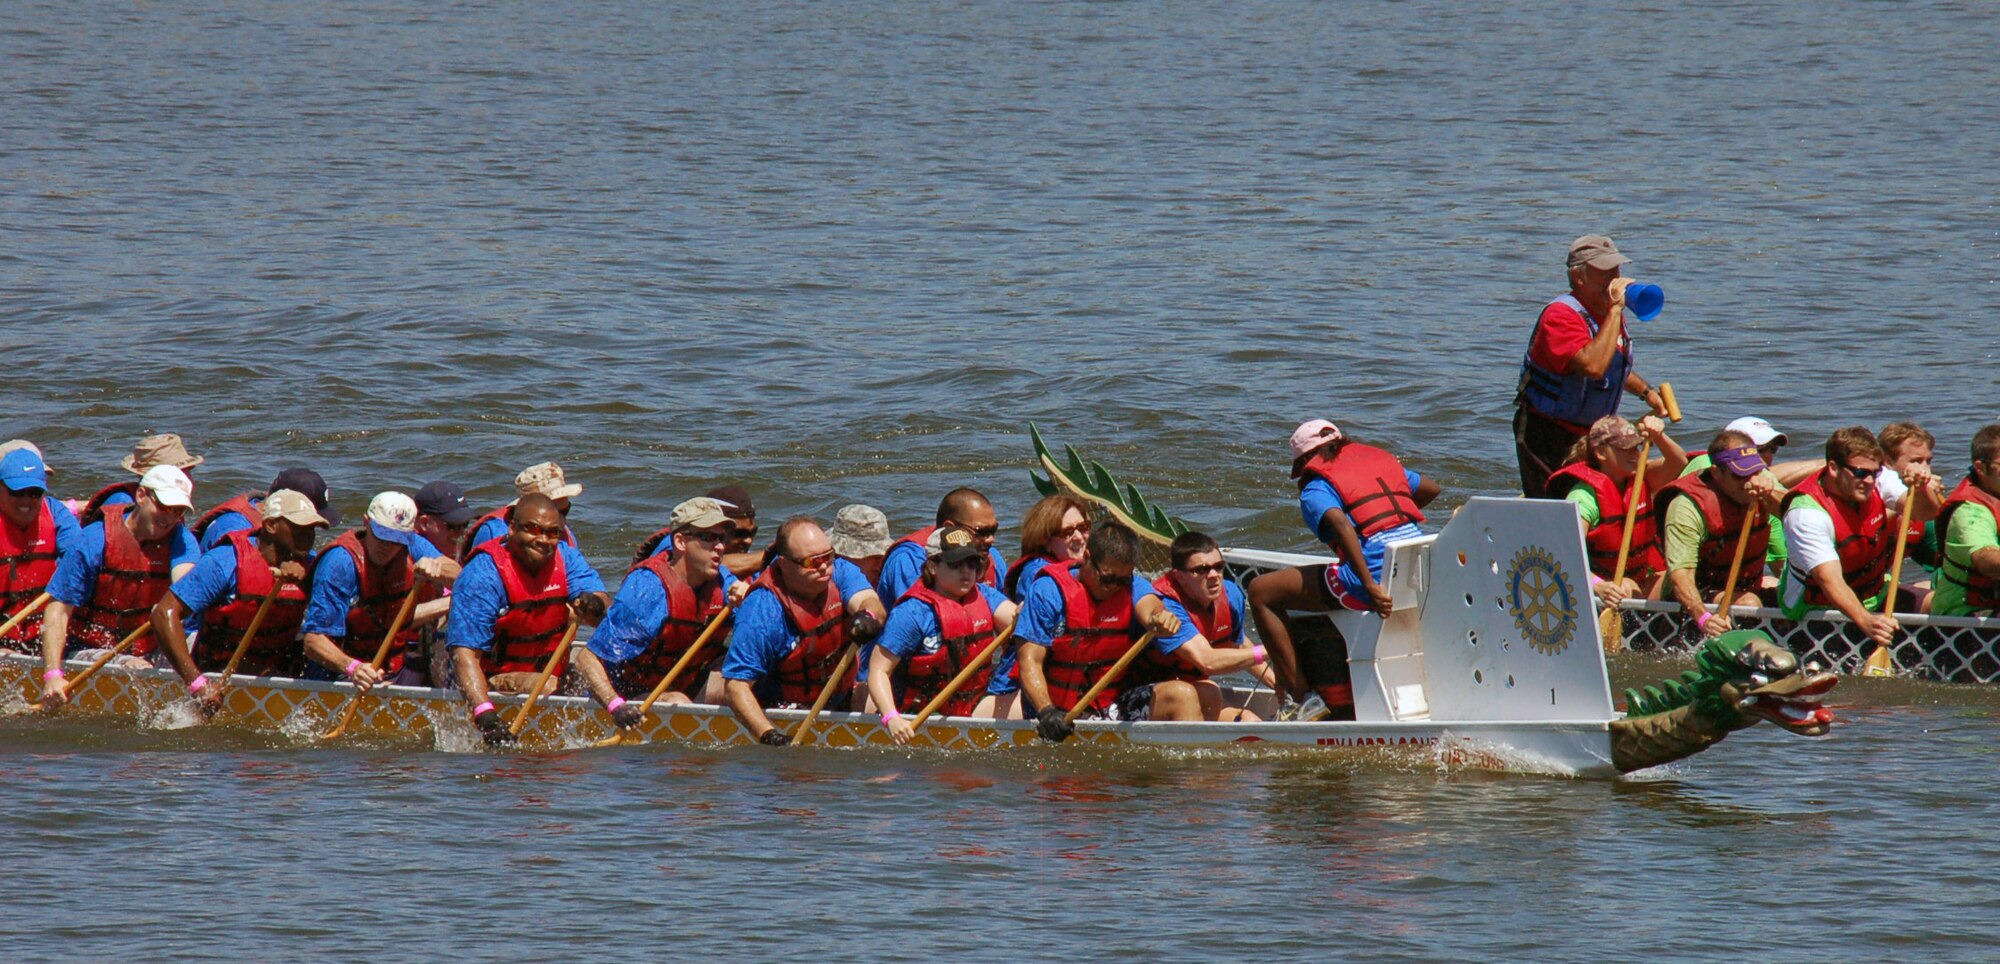 SHREVEPORT, La. – Members of the “Mighty Eighth” dragon boat team (blue shirts) tries to catch up to another team in the dragon boat races during the third annual Red River Dragon Boat Festival Sept. 10, 2011. This year's race featured 27 teams, all vigorously paddling 41-foot-long boats to the finish line. Each team is comprised of a minimum of 20 paddlers, a captain and a drummer who beats the cadence as they paddle. (U.S. Air Force photo by Staff Sgt. Brian Stives)